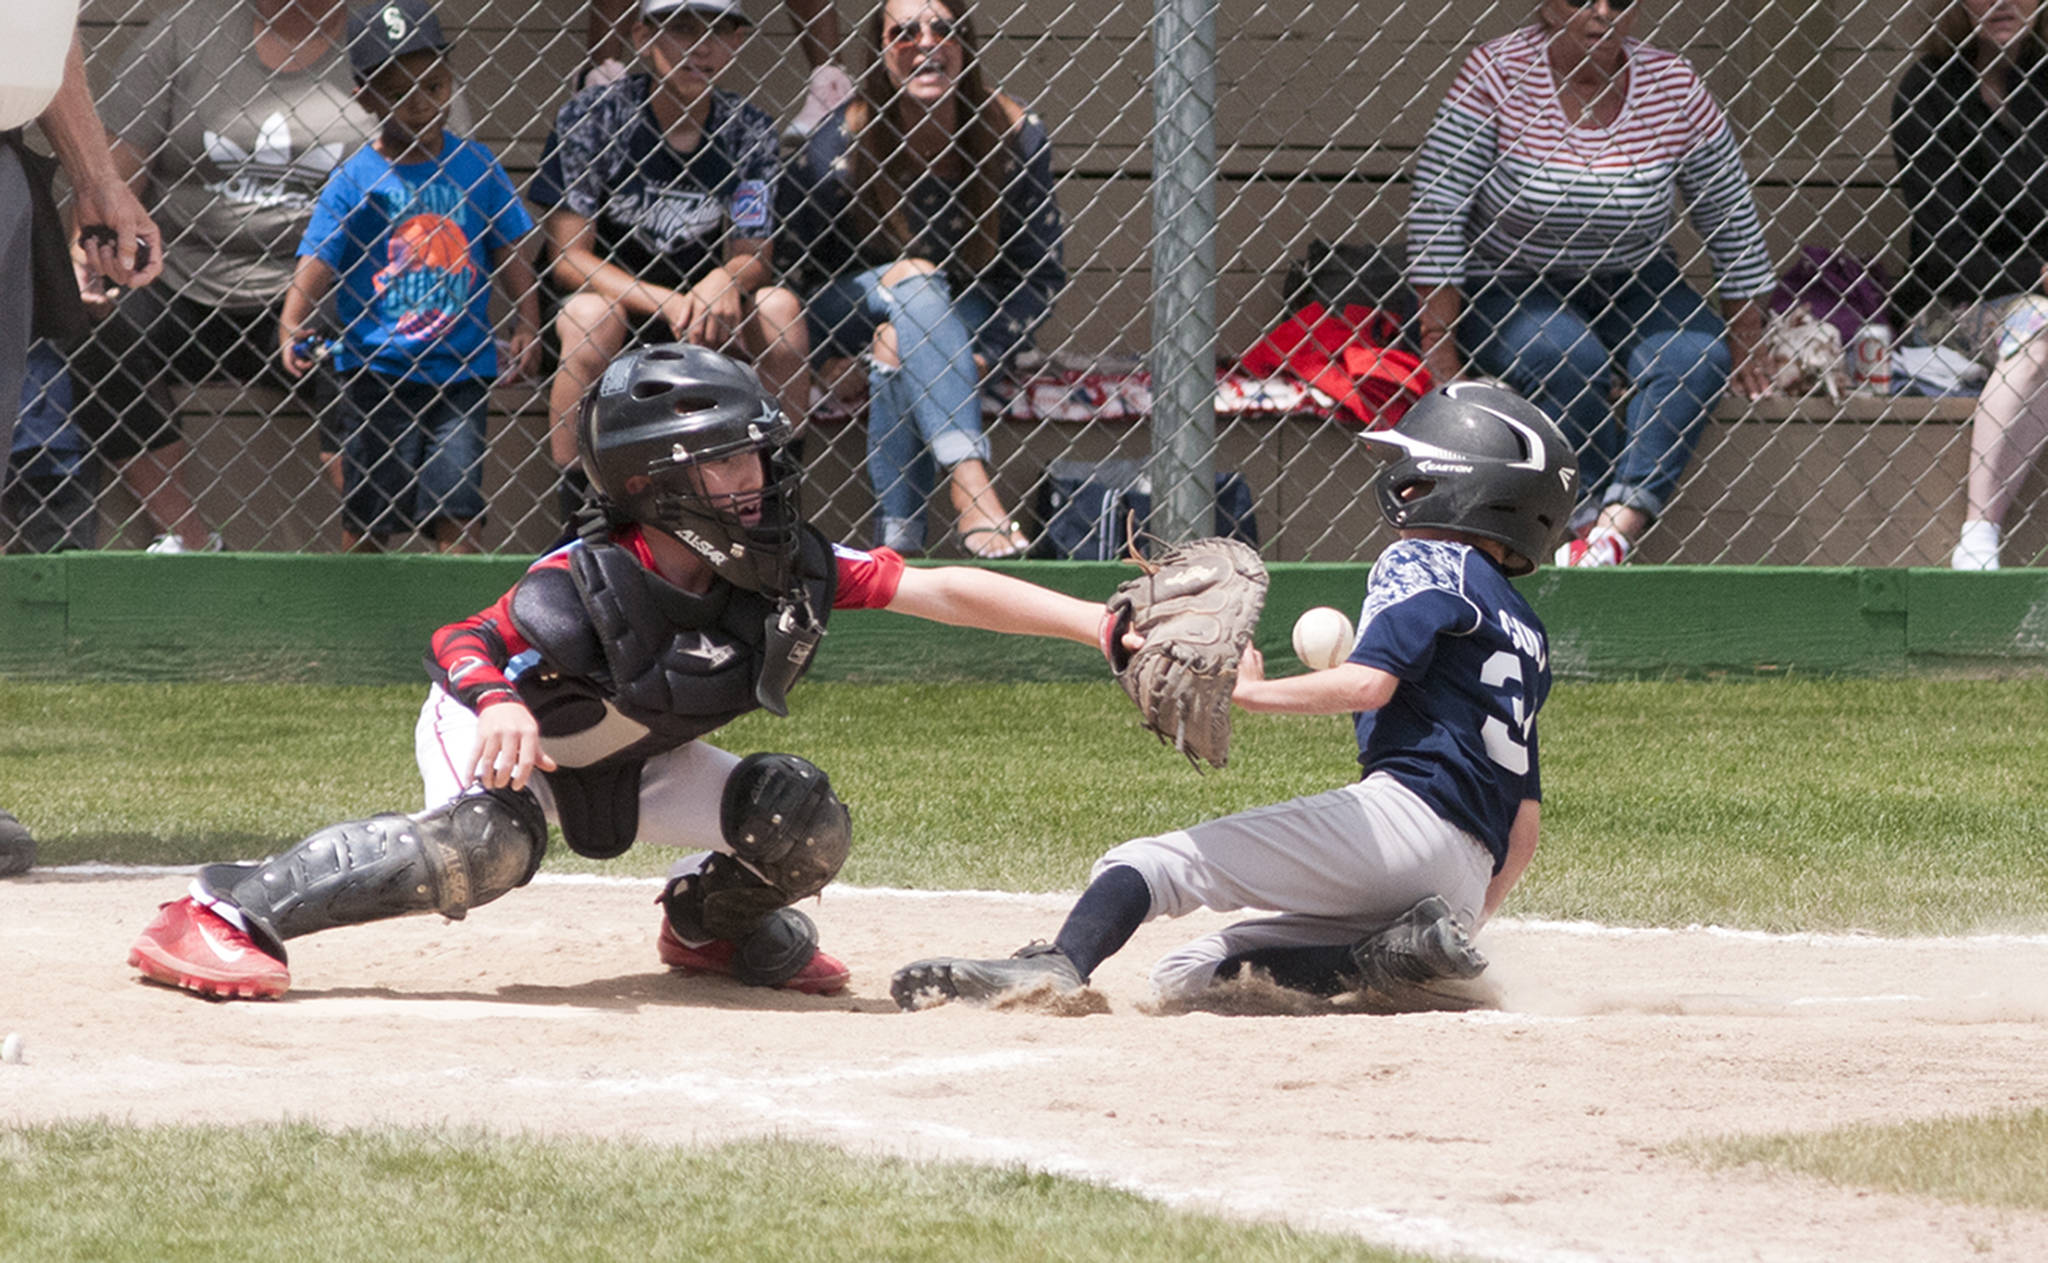 West Valley advances at state 8-10 tourney with 12-2 win over Larch Mountain